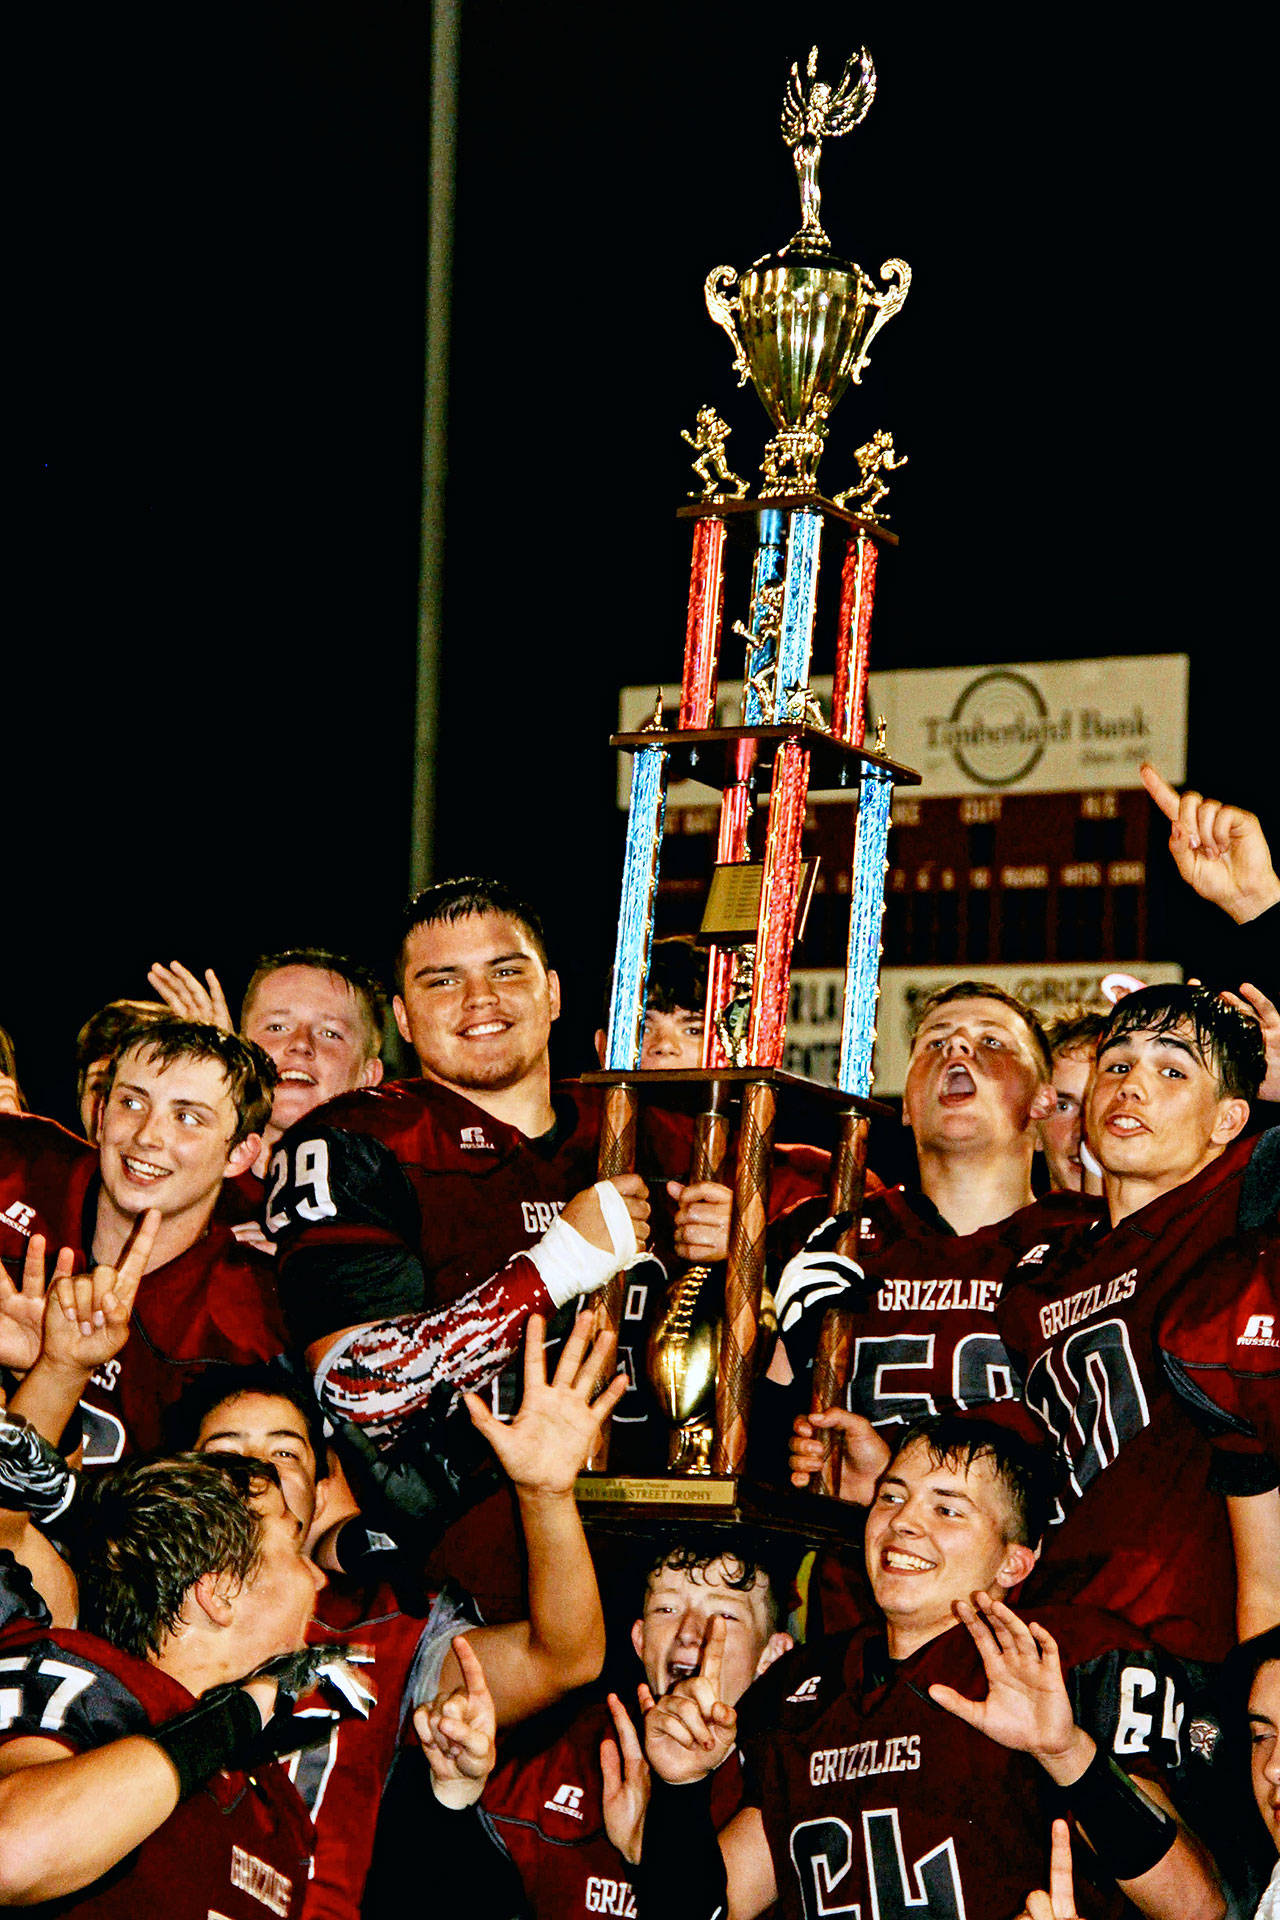 The Hoquiam Grizzlies hold up the Myrtle Street Rivalry trophy after defeating the Aberdeen Bobcats 56-3 on Friday, Sept. 13. Hoquiam has won 13 of its last 14 games dating back to last season and faces La Center on Friday. (Photo by Jinny Marchand)